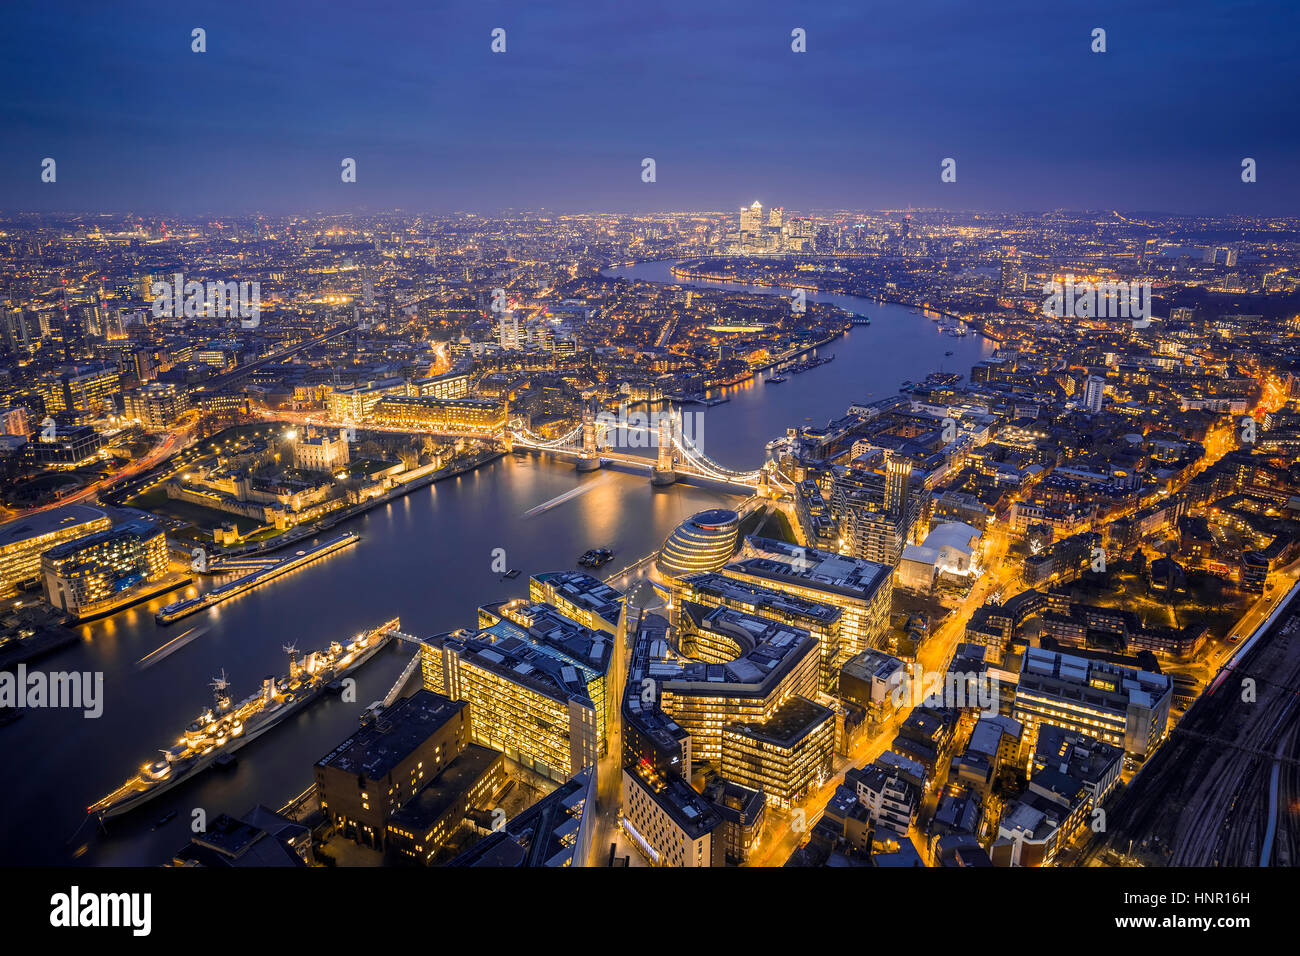 London, England - Aerial Skyline view of London. This view includes the Tower of London, the iconic Tower Bridge, HMS Belfast ship and skyscrapers of  Stock Photo